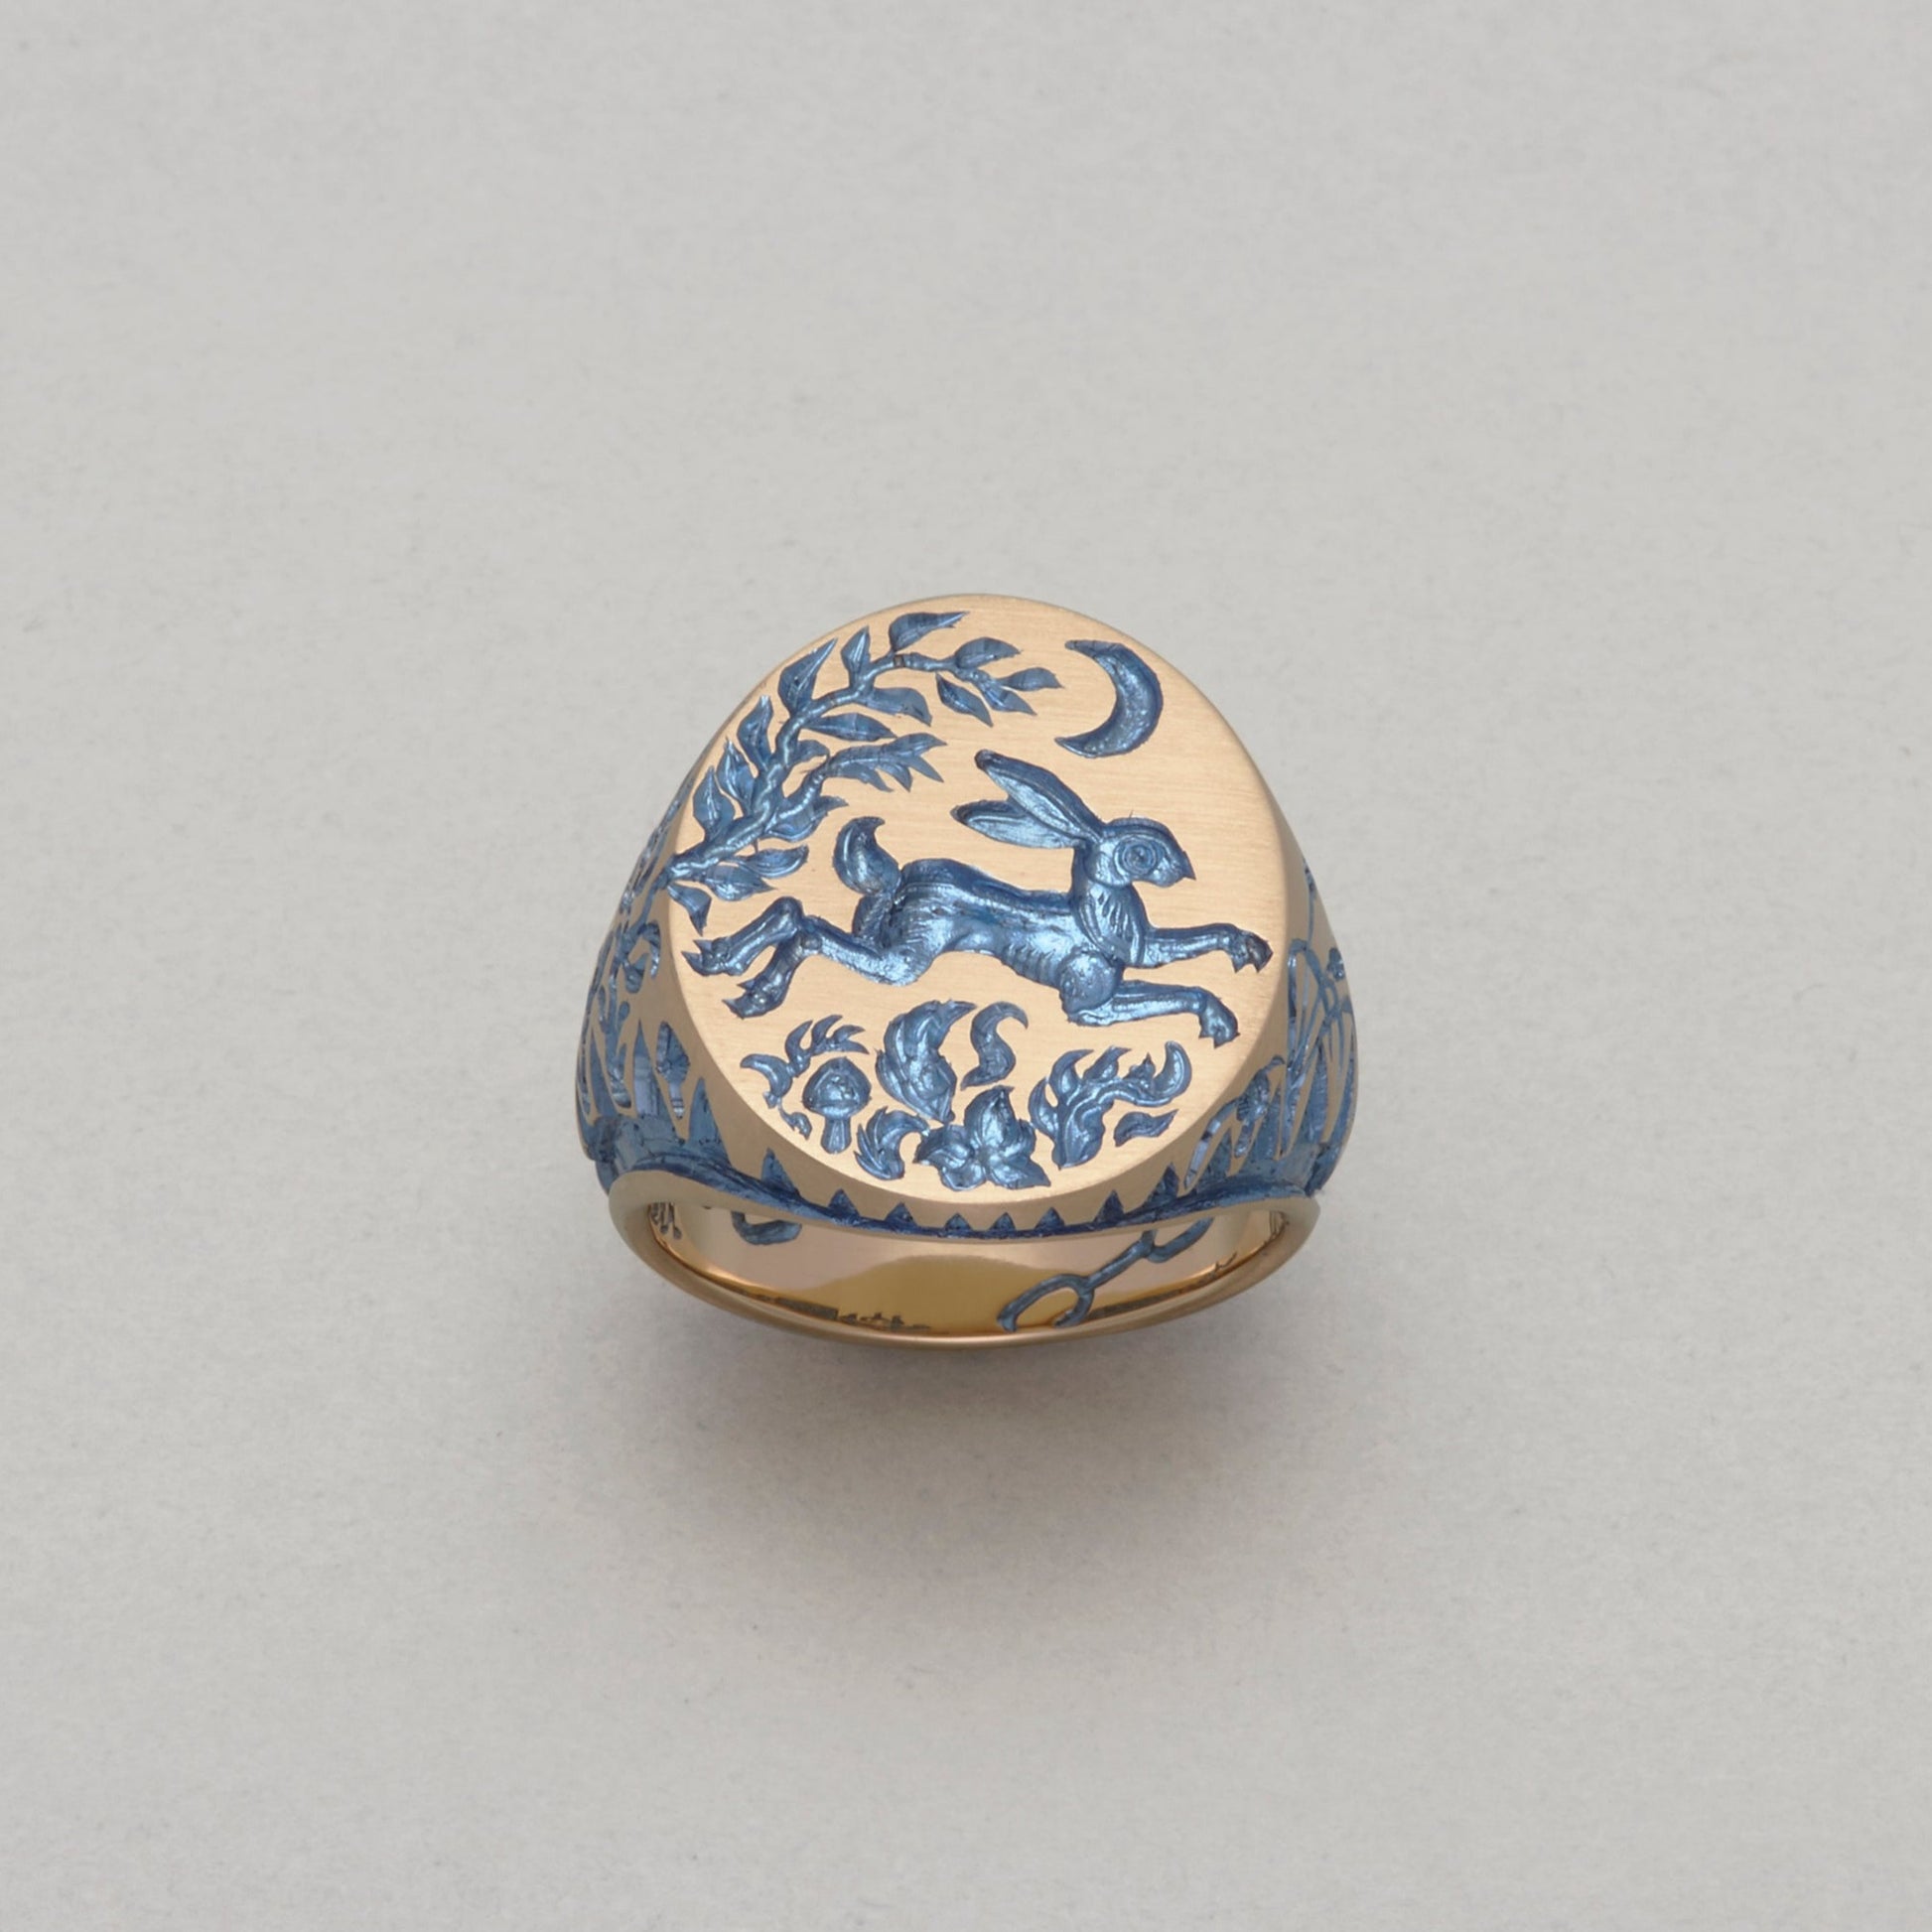 Castro Smith - Gold Rabbit Signet ring with Moon. 